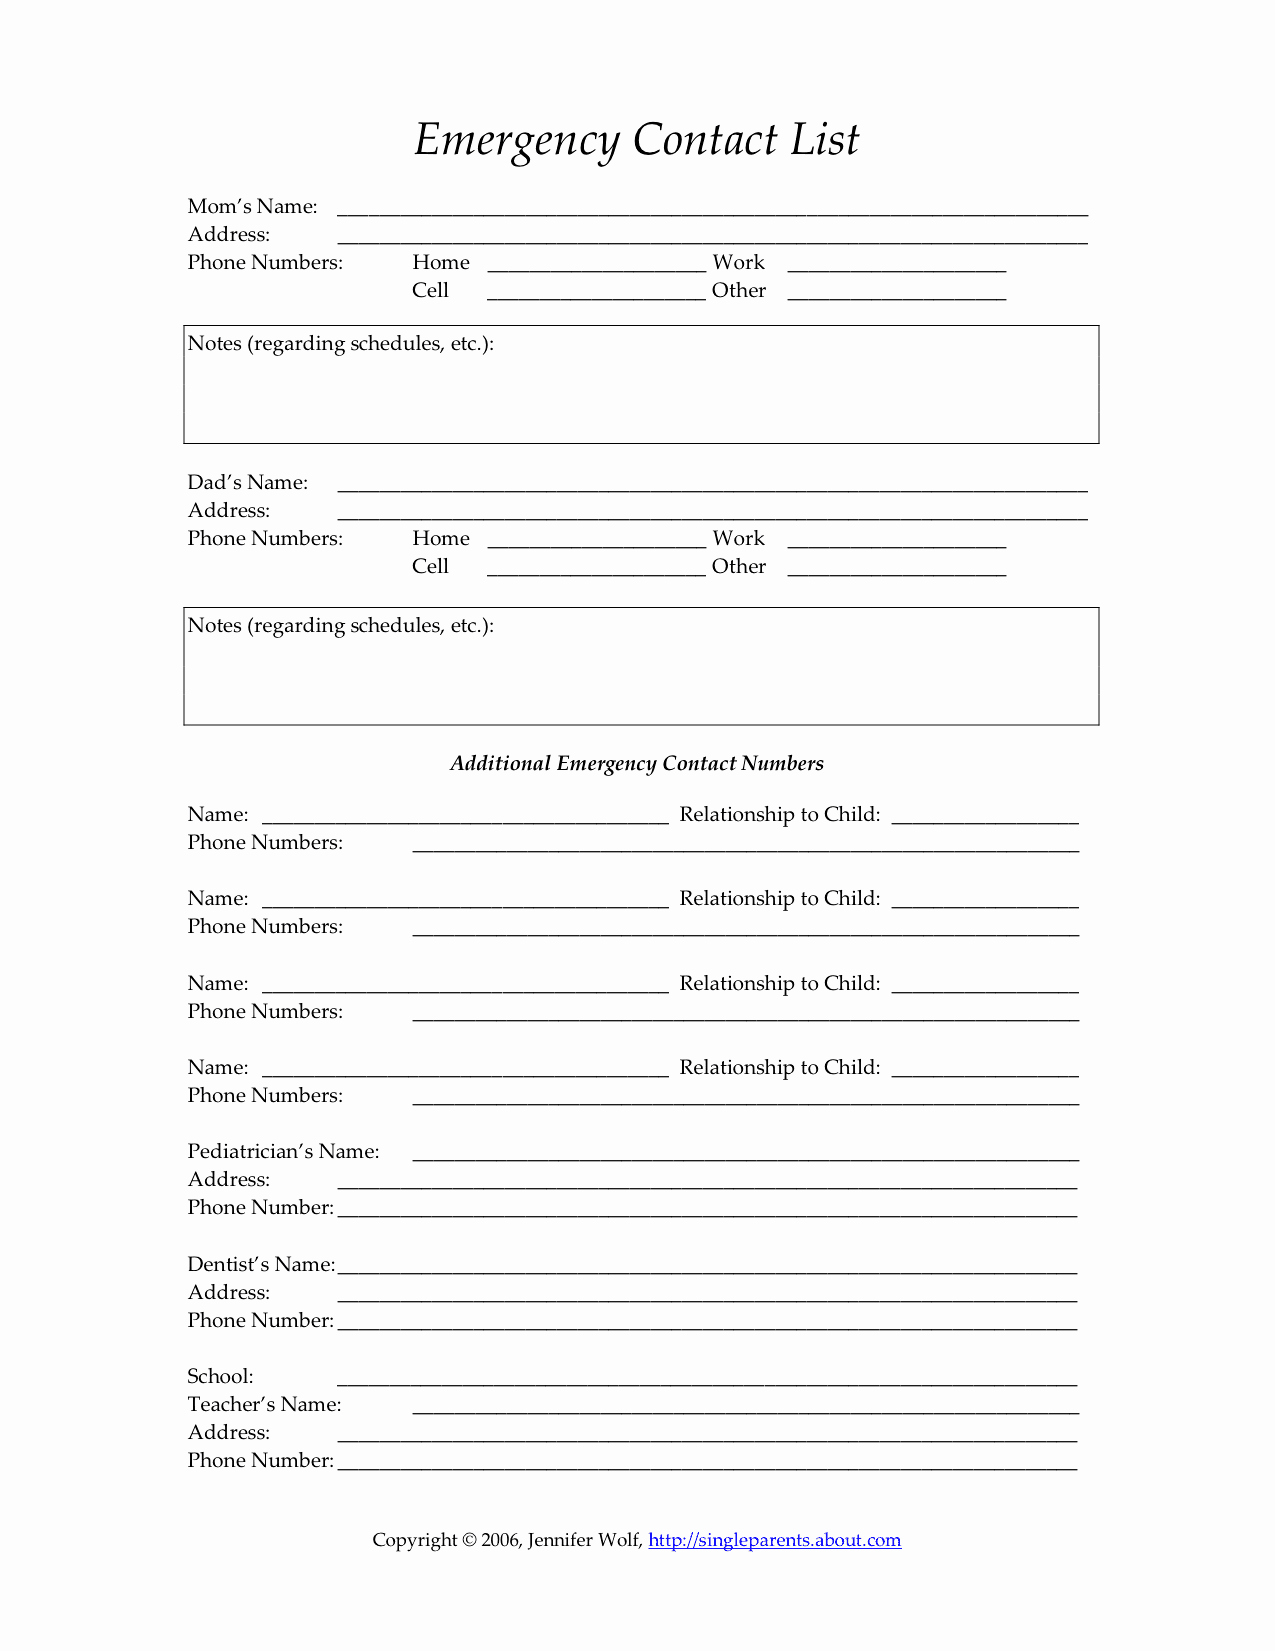 Emergency Contact form Template New Child S Emergency Contact form